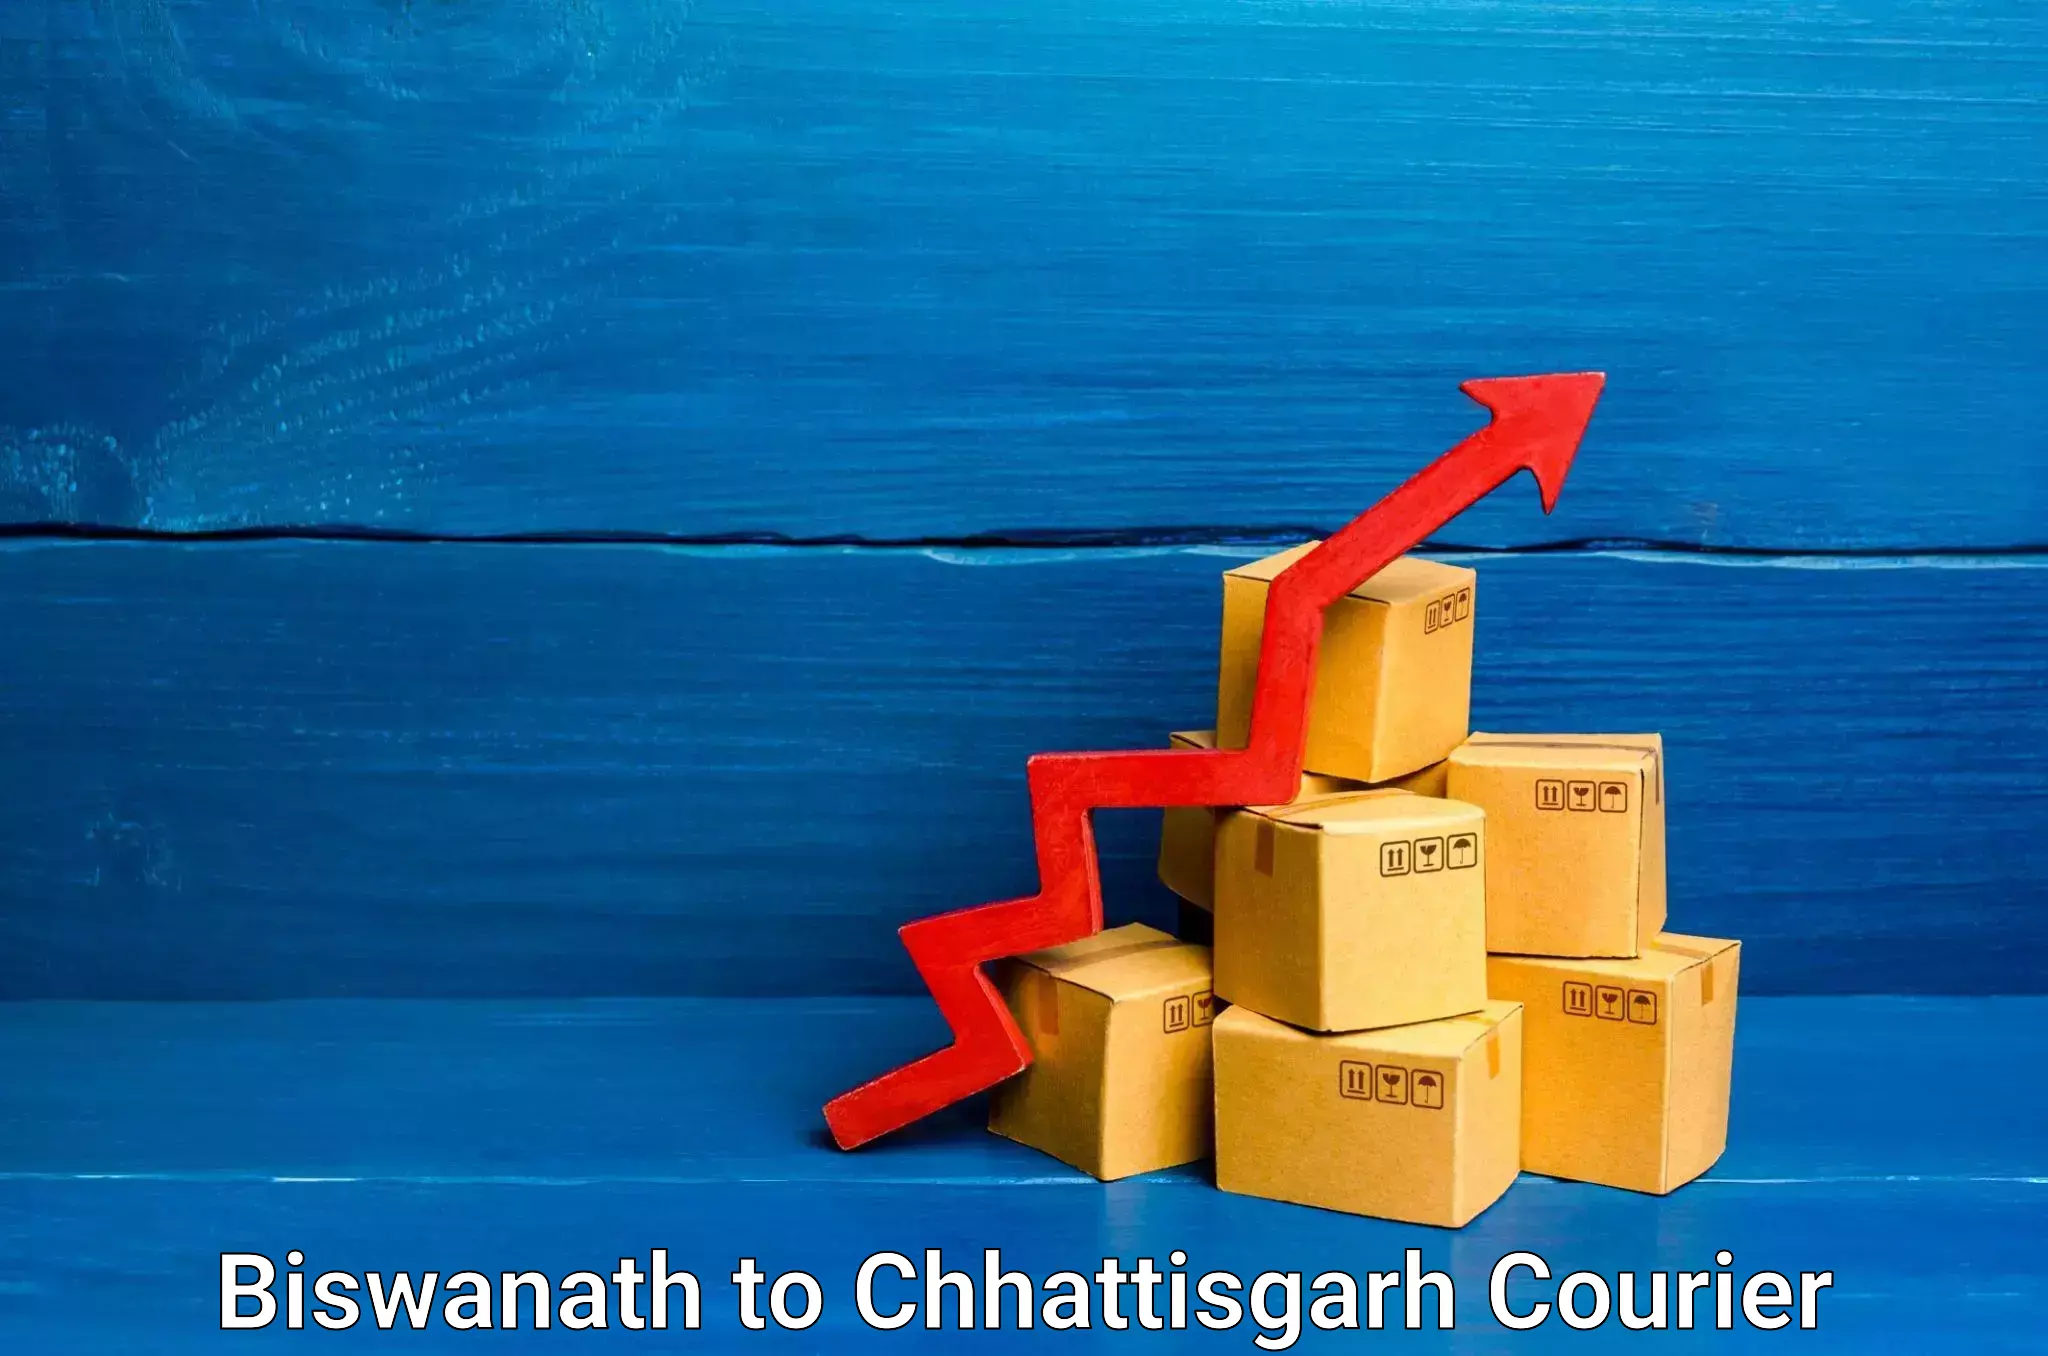 On-call courier service Biswanath to Ramanujganj